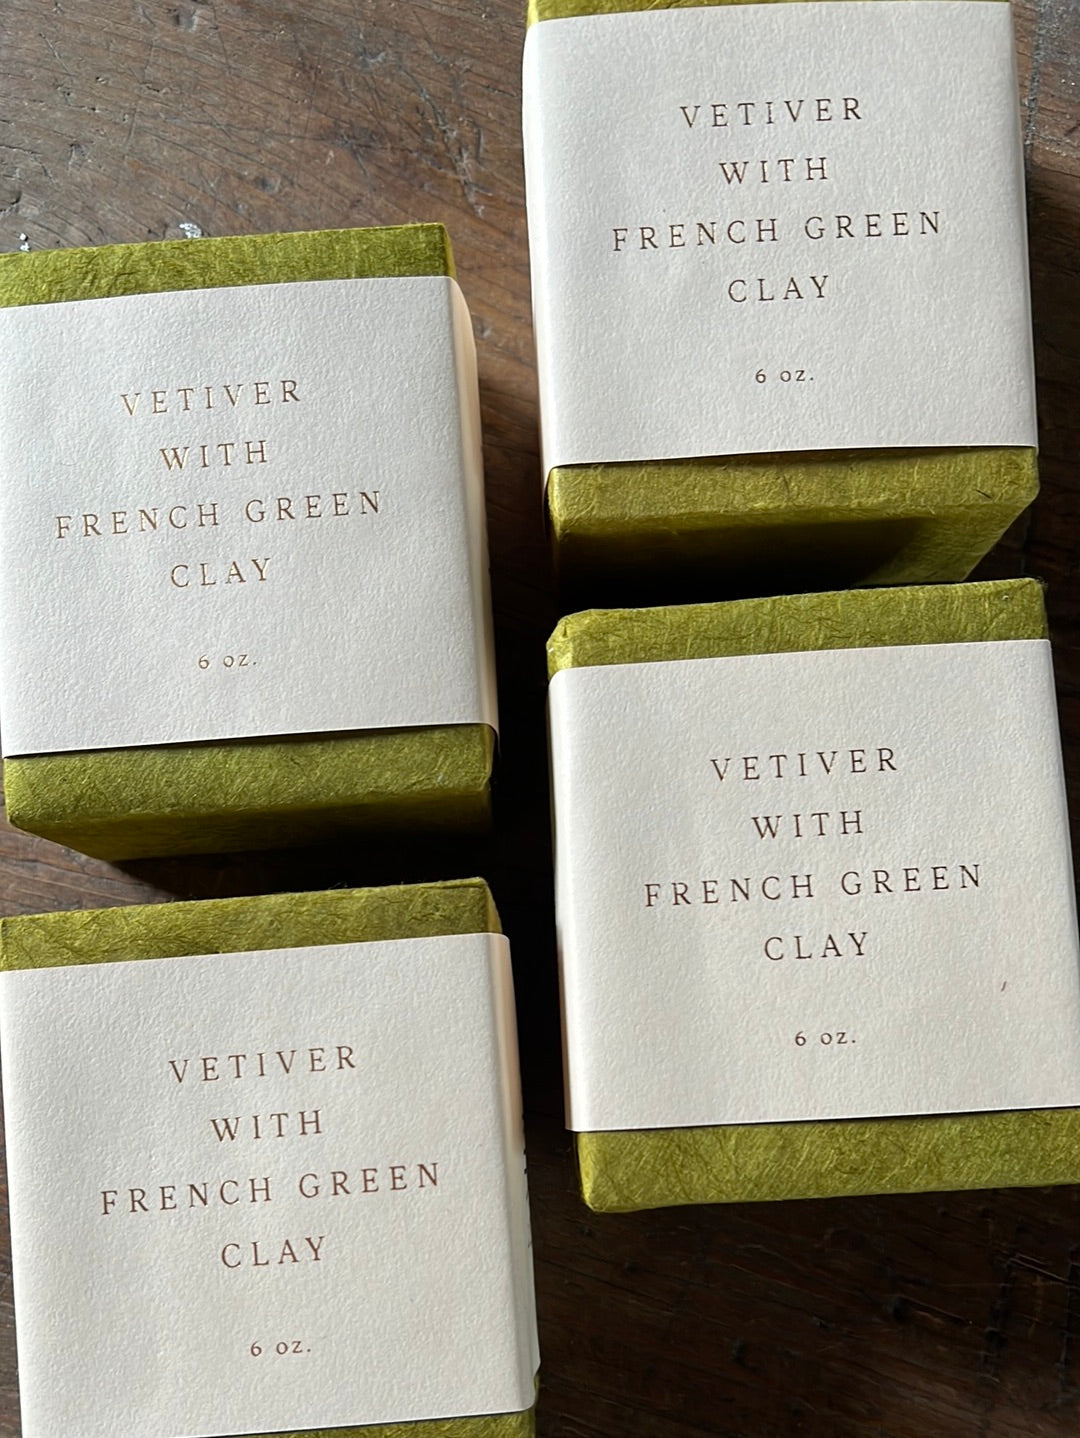 SAIPUA Vetiver with French Green Clay Soap